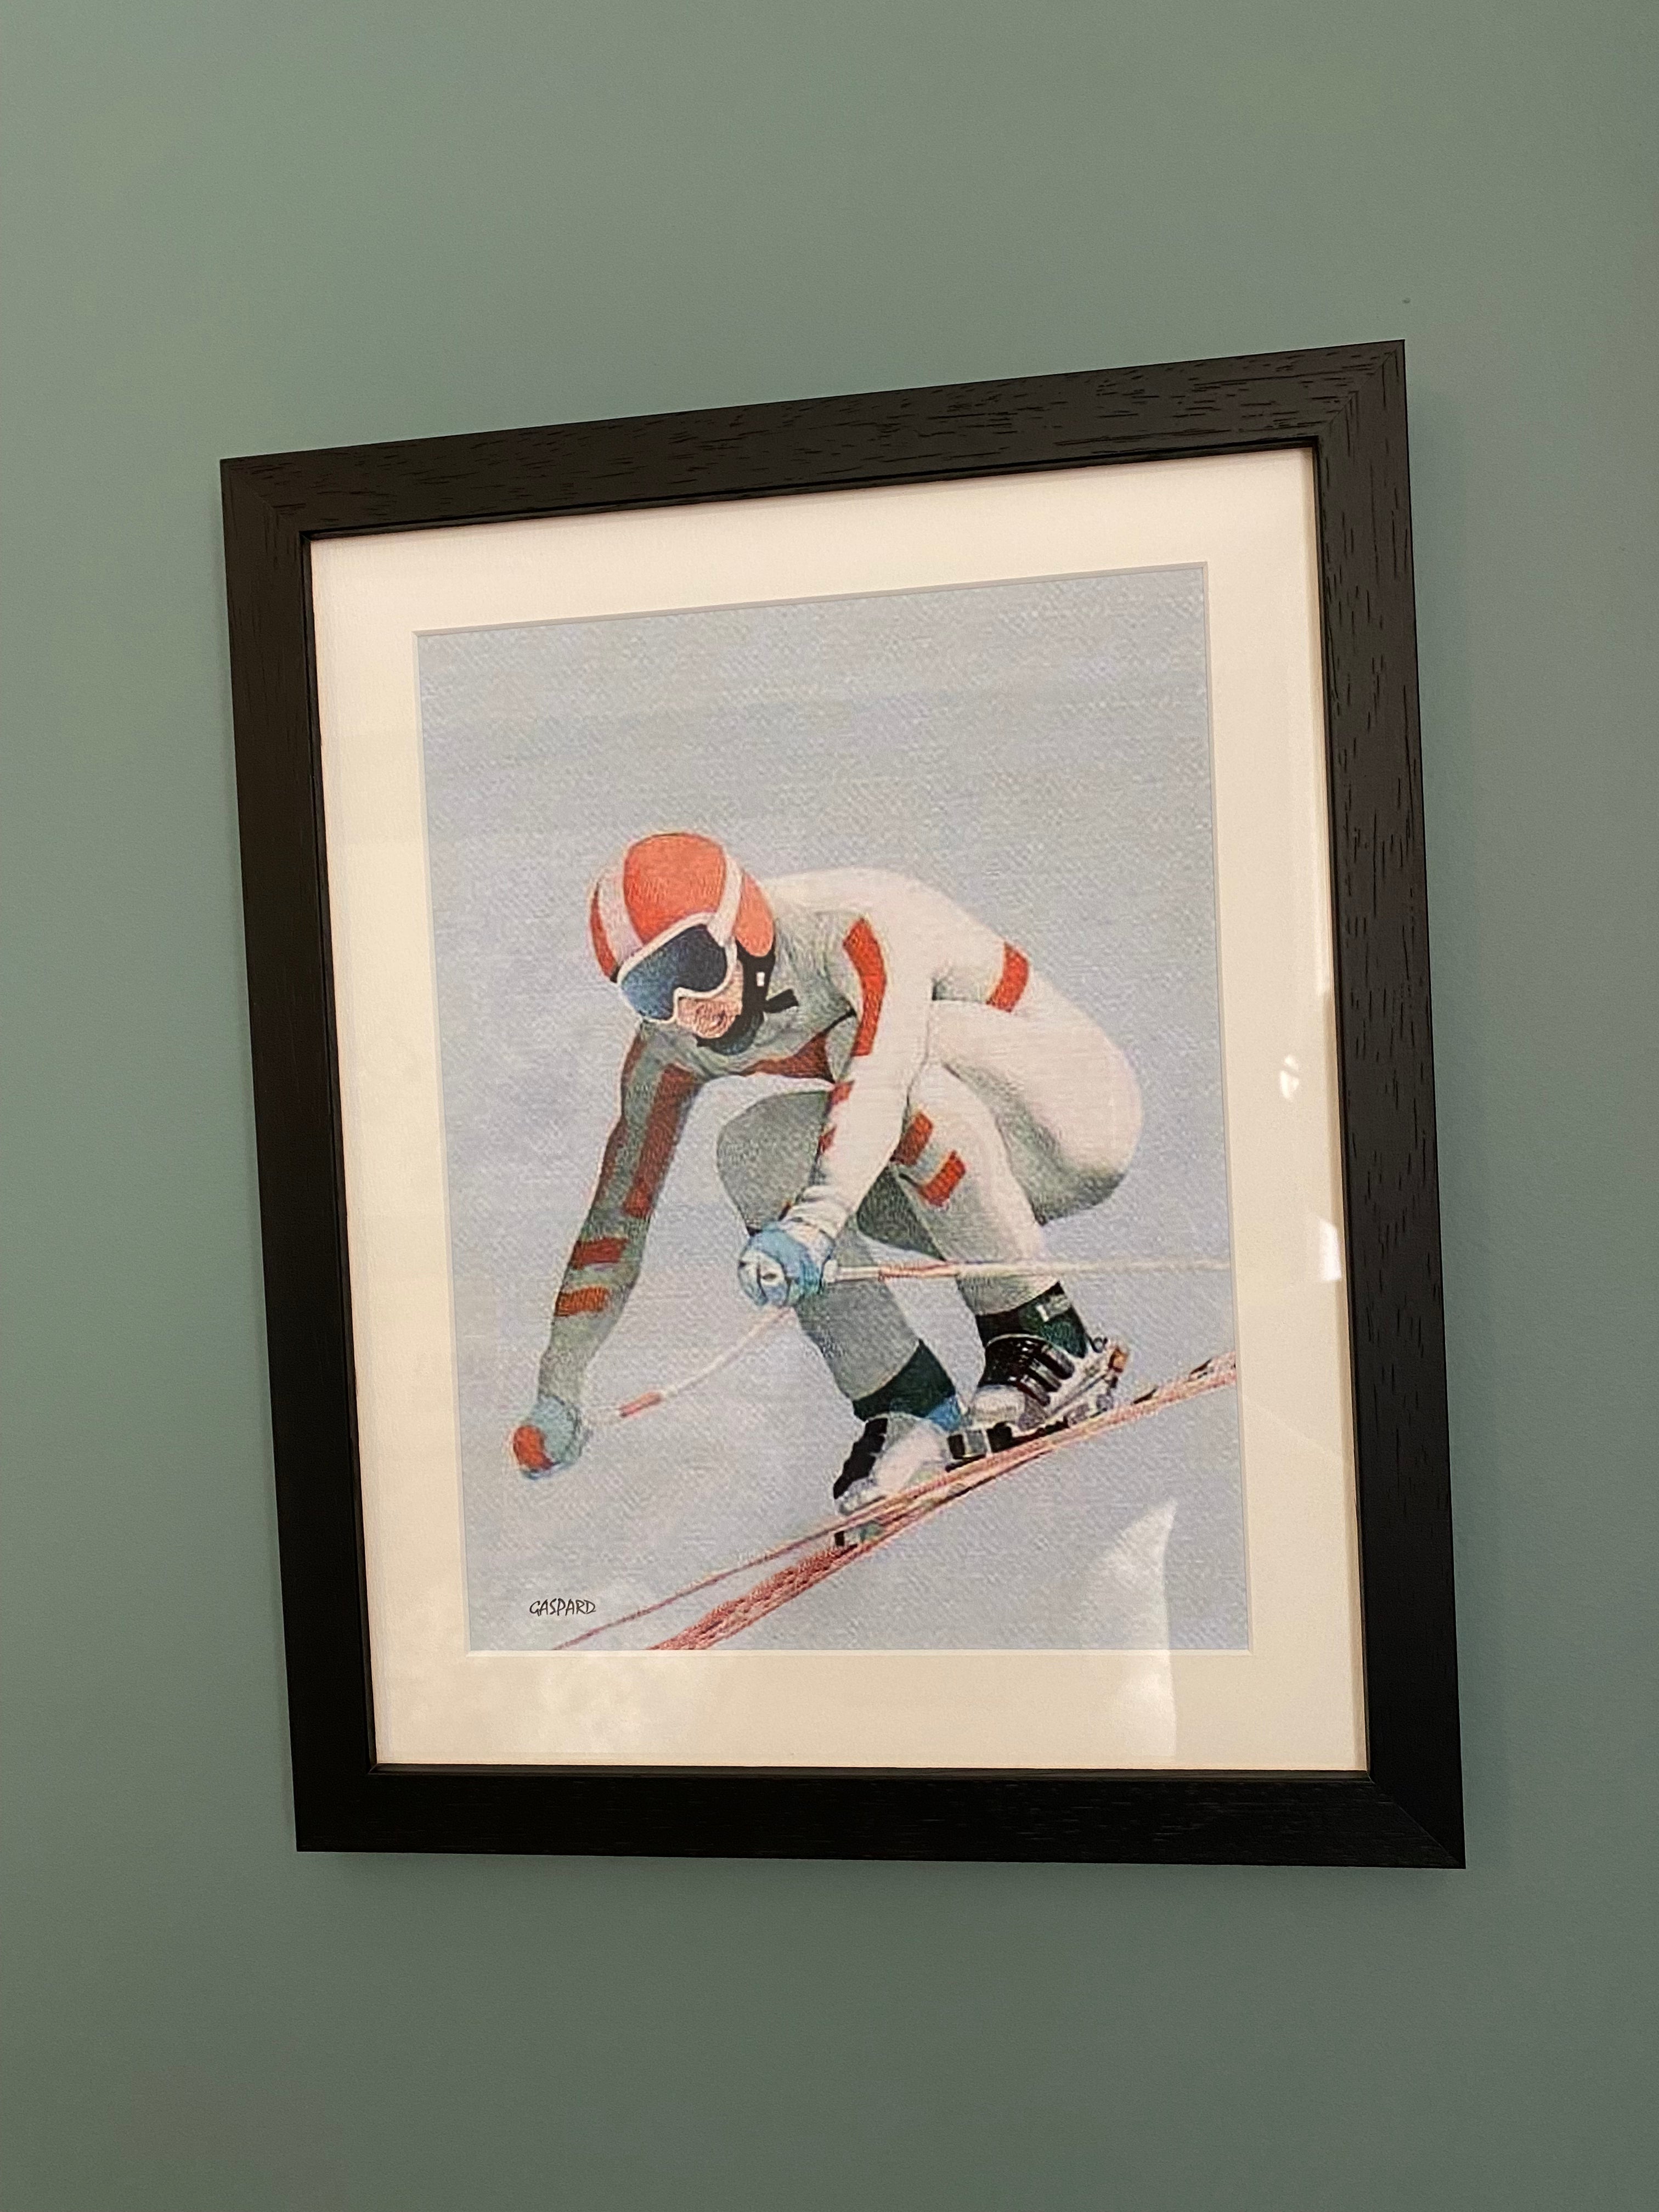 Black framed print of a person in a white fitted racing suit with red stripes, a red helmet with a central white stripe, with skis, boots and poles in a crouched position airborne and skiing downhill, with a light blue sky in the background, hanging on a green wall. 